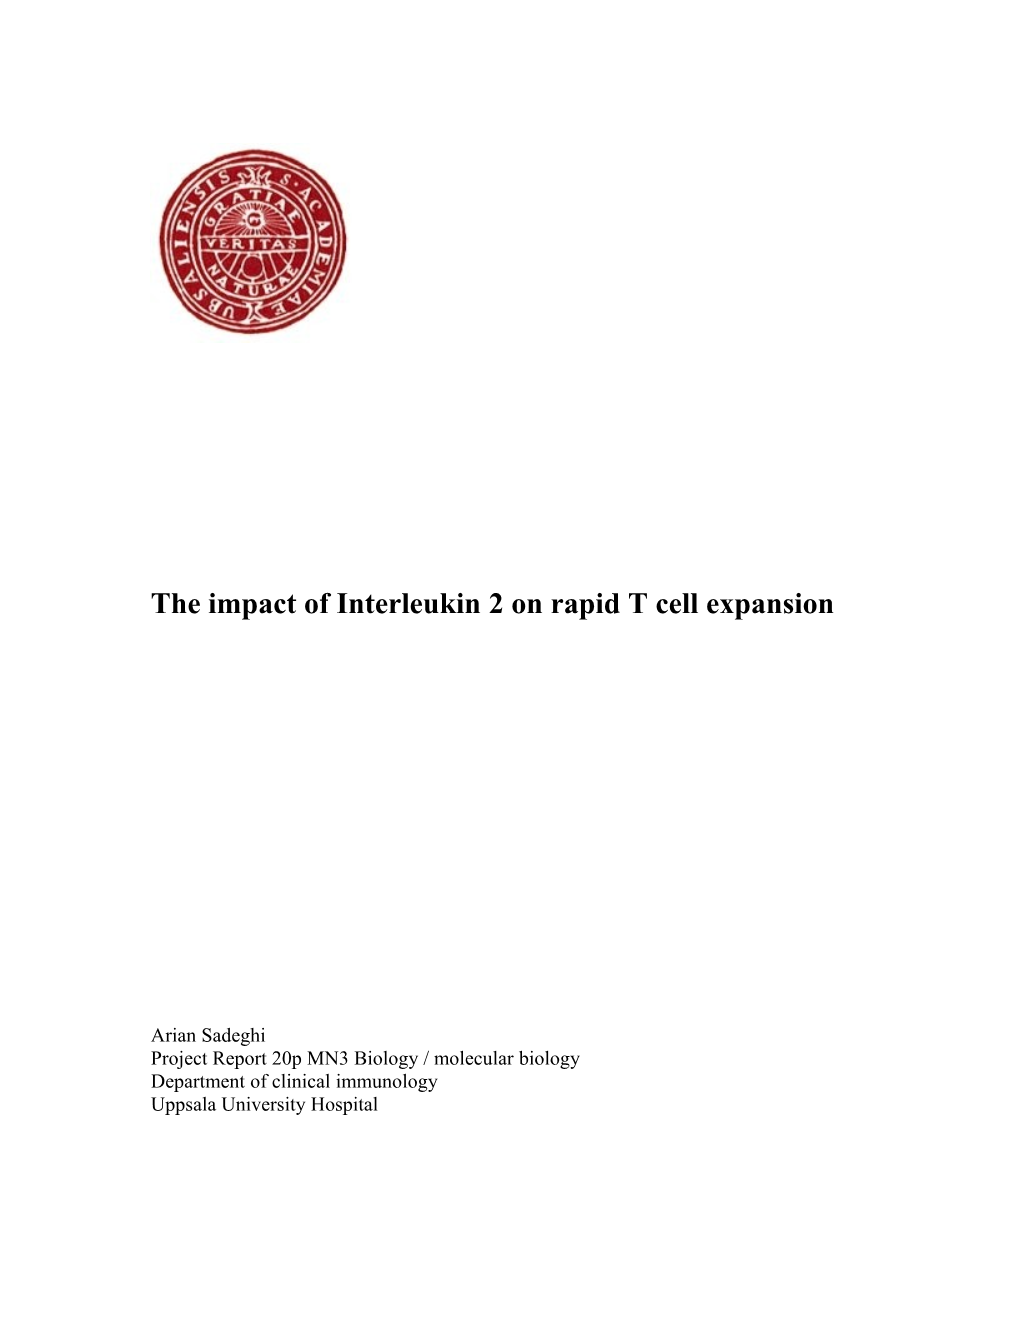 The Impact of Interleukin 2 on Rapid T Cell Expansion